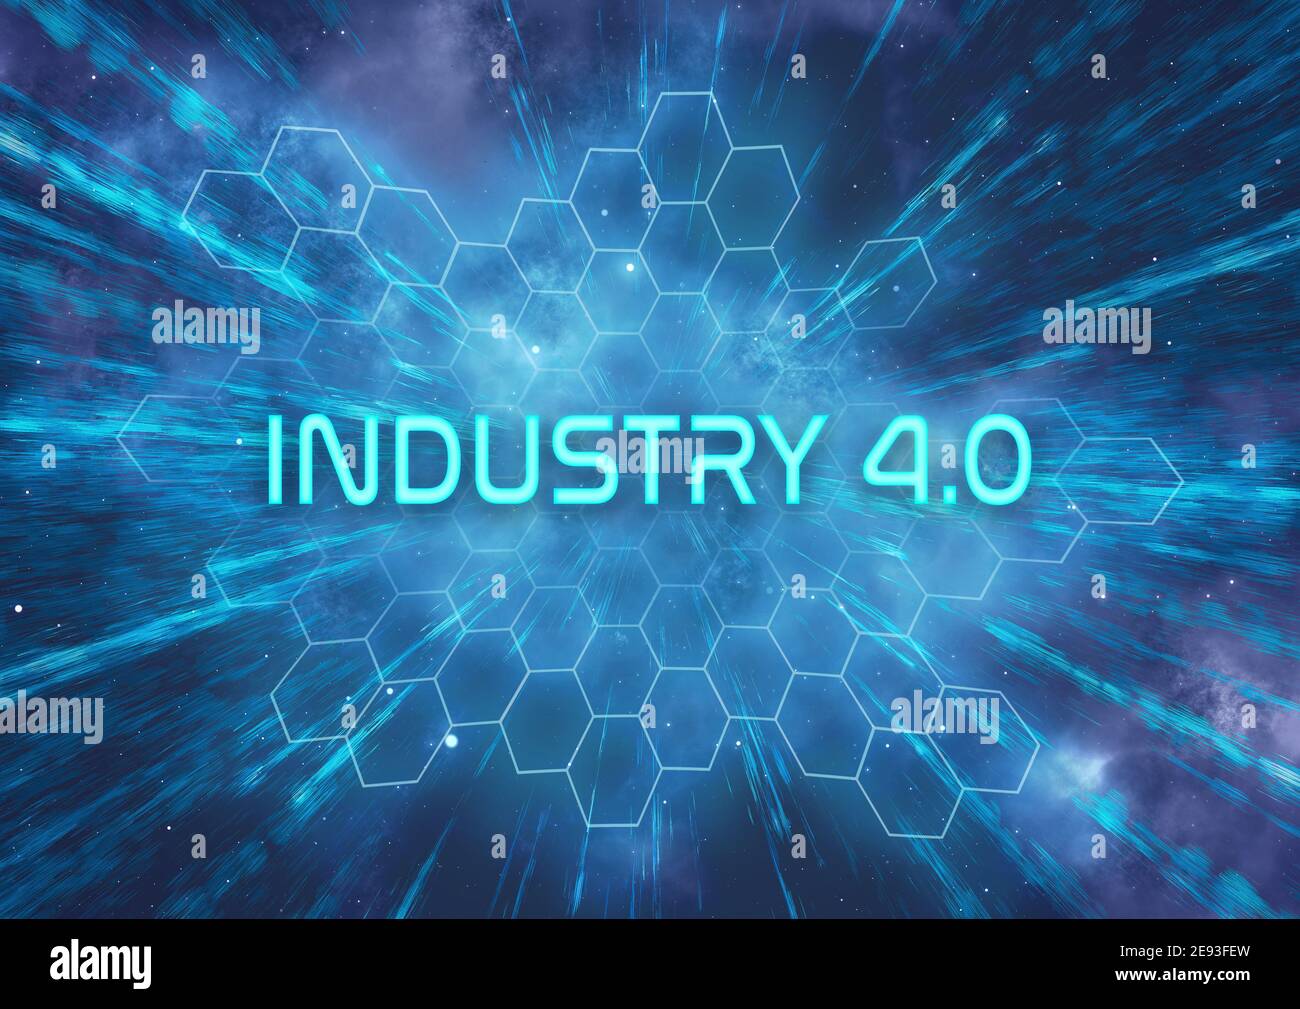 A futuristic 'Industry 4.0' typographical illustration that symbolizes the rapid progression in technology Stock Photo